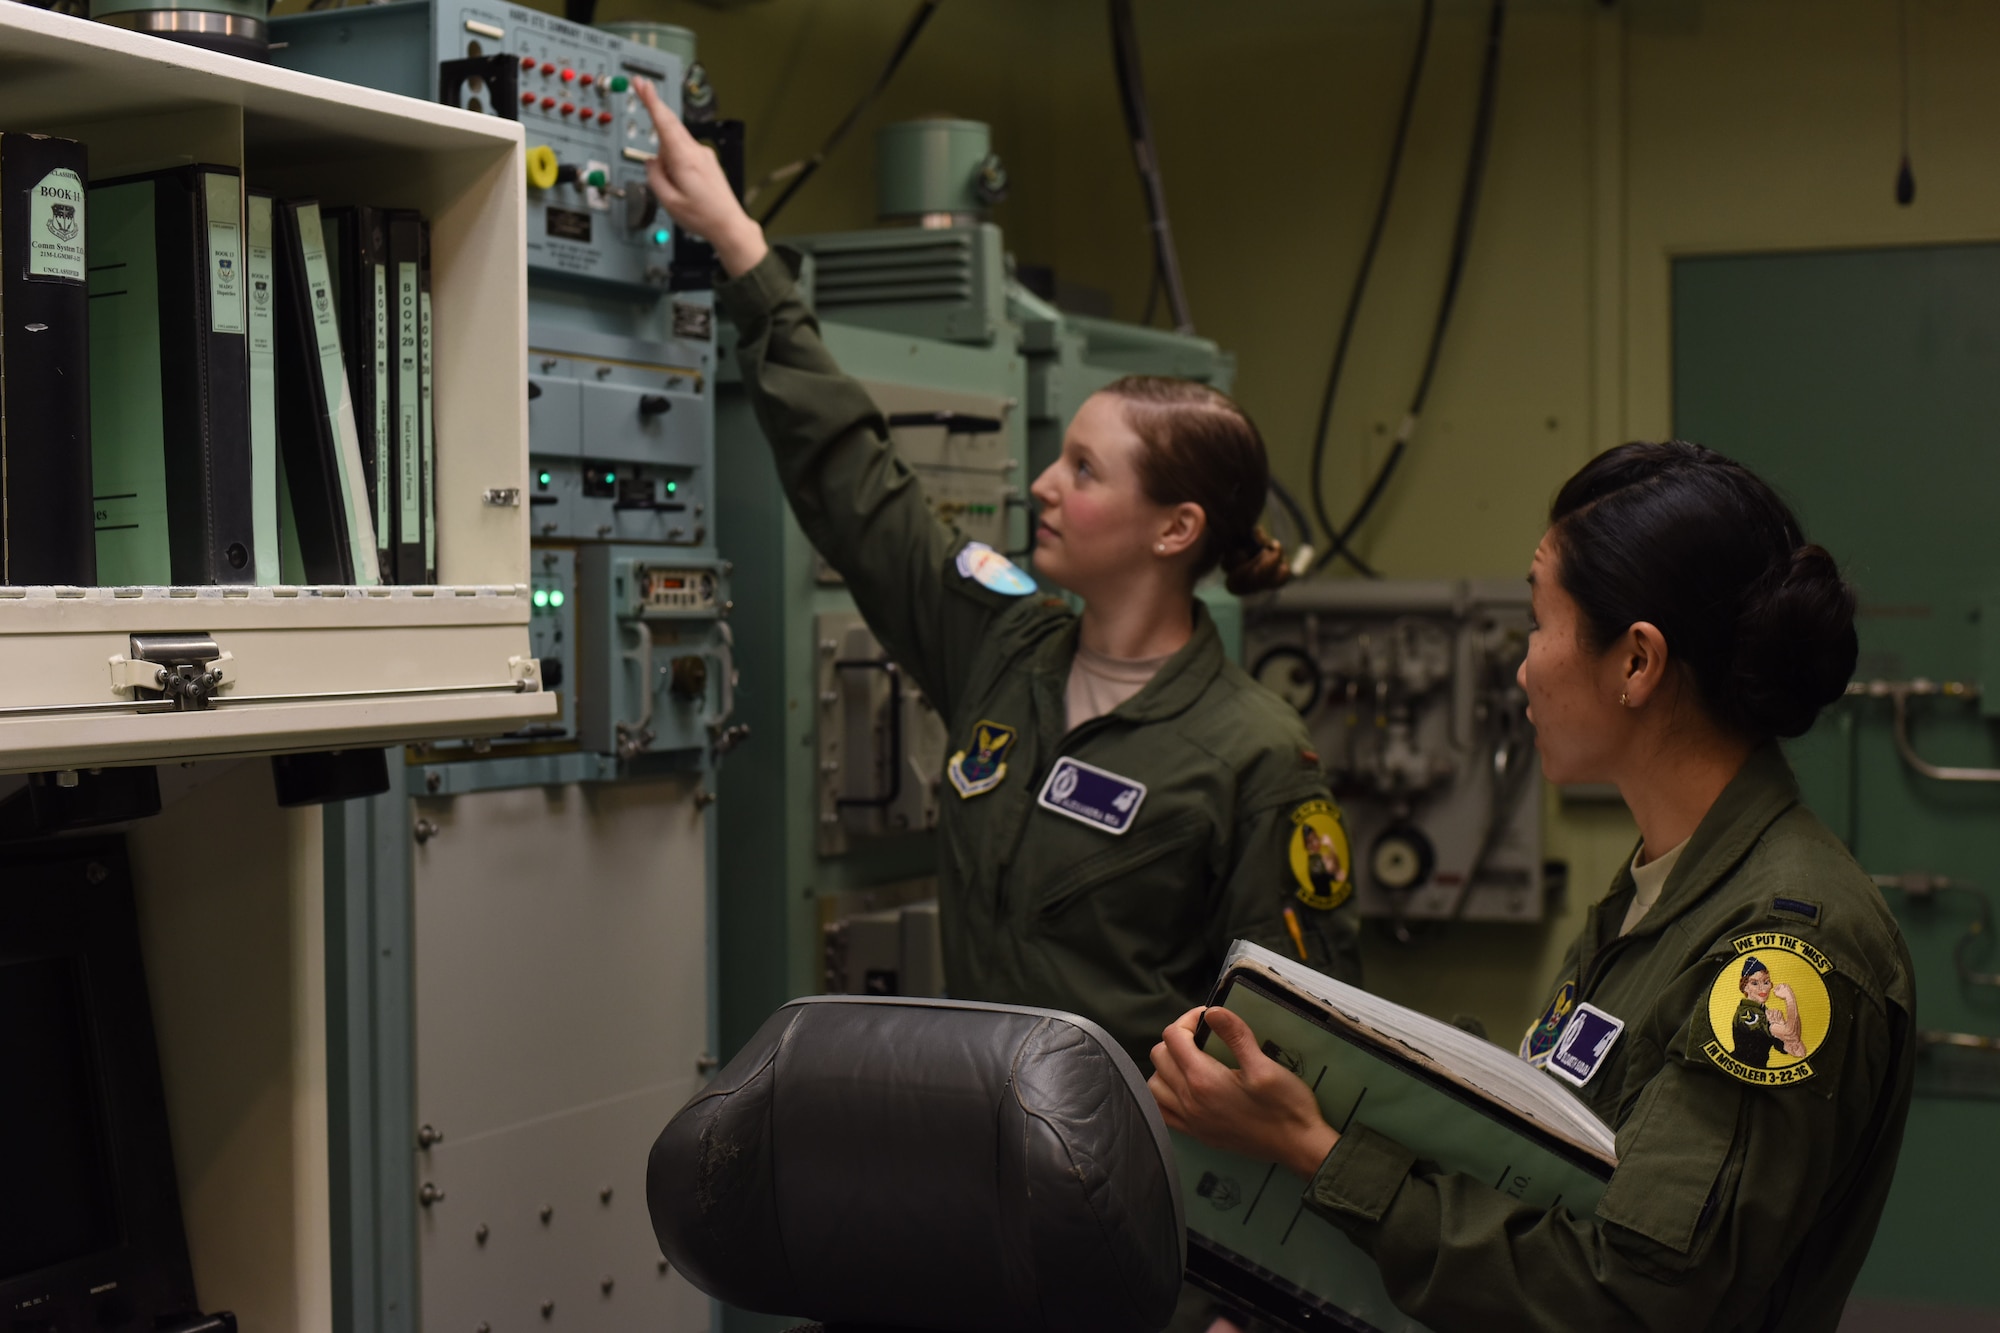 2nd Lt. Alexandra Rea, 490th Missile Squadron ICBM combat crew deputy director, left, and 1st Lt. Elizabeth Guidara, 12th Missile Squadron combat crew deputy director, perform training at the Malmstrom Air Force Base, Mont. Building 500 Missile Procedures Trainer March, 21, 2016. During their assignment, the all-female crews of missileers will maintain a 24-hour alert shift to sustain an active alert status of our nation’s intercontinental ballistic missile force. (U.S. Air Force photo/Airman Collin Schmidt)